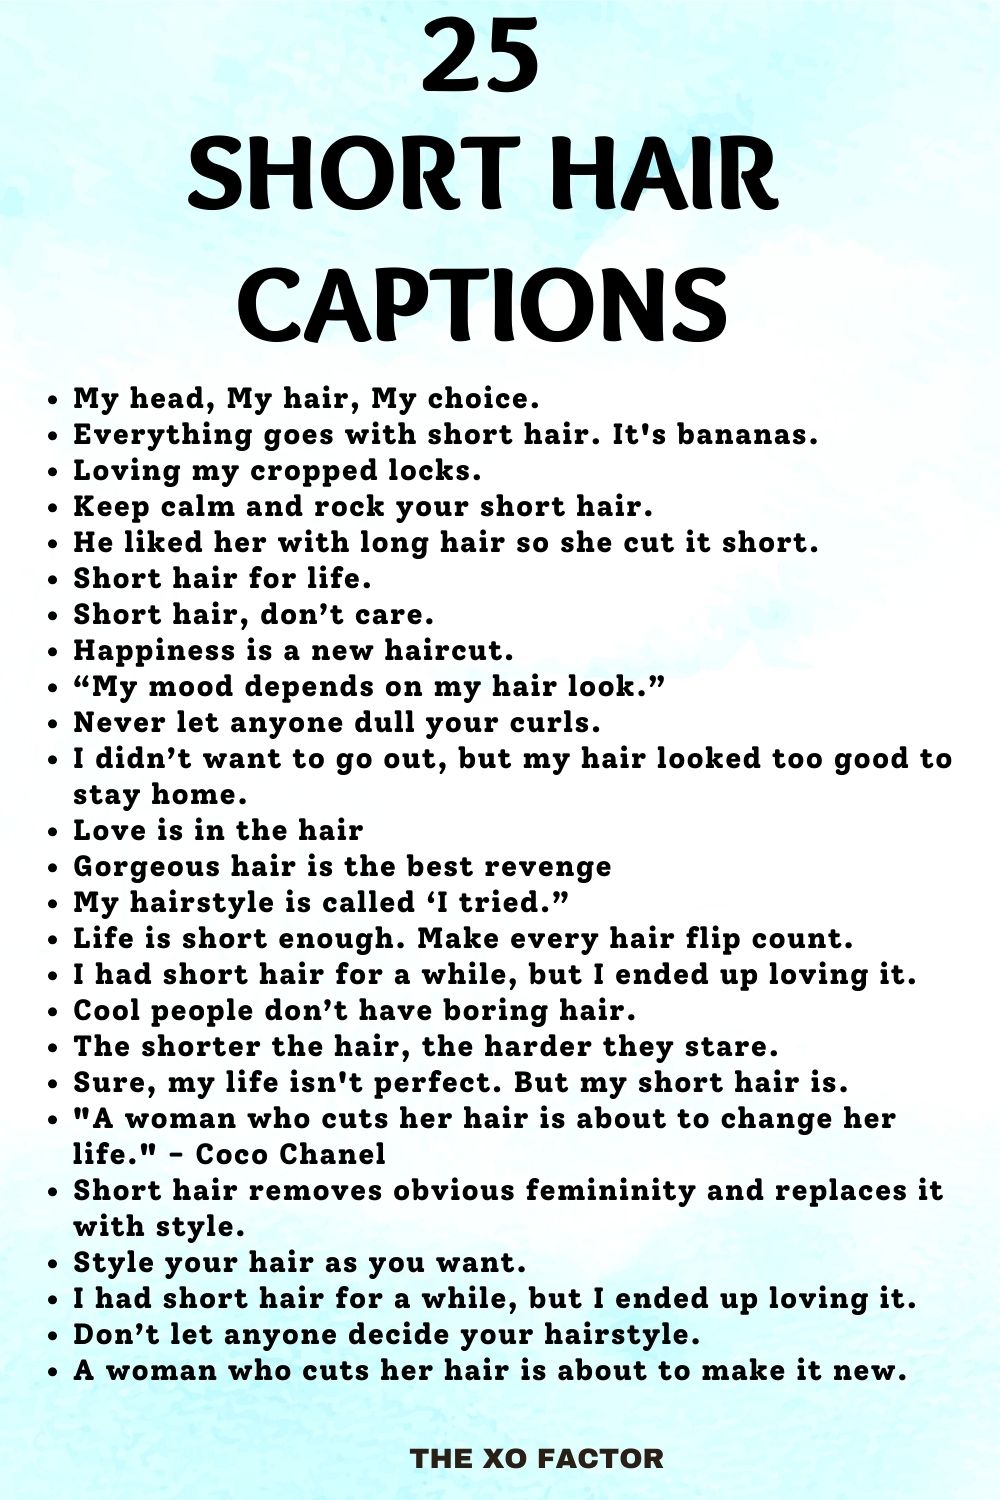 200 New Haircut Captions To Flaunt Your New Look